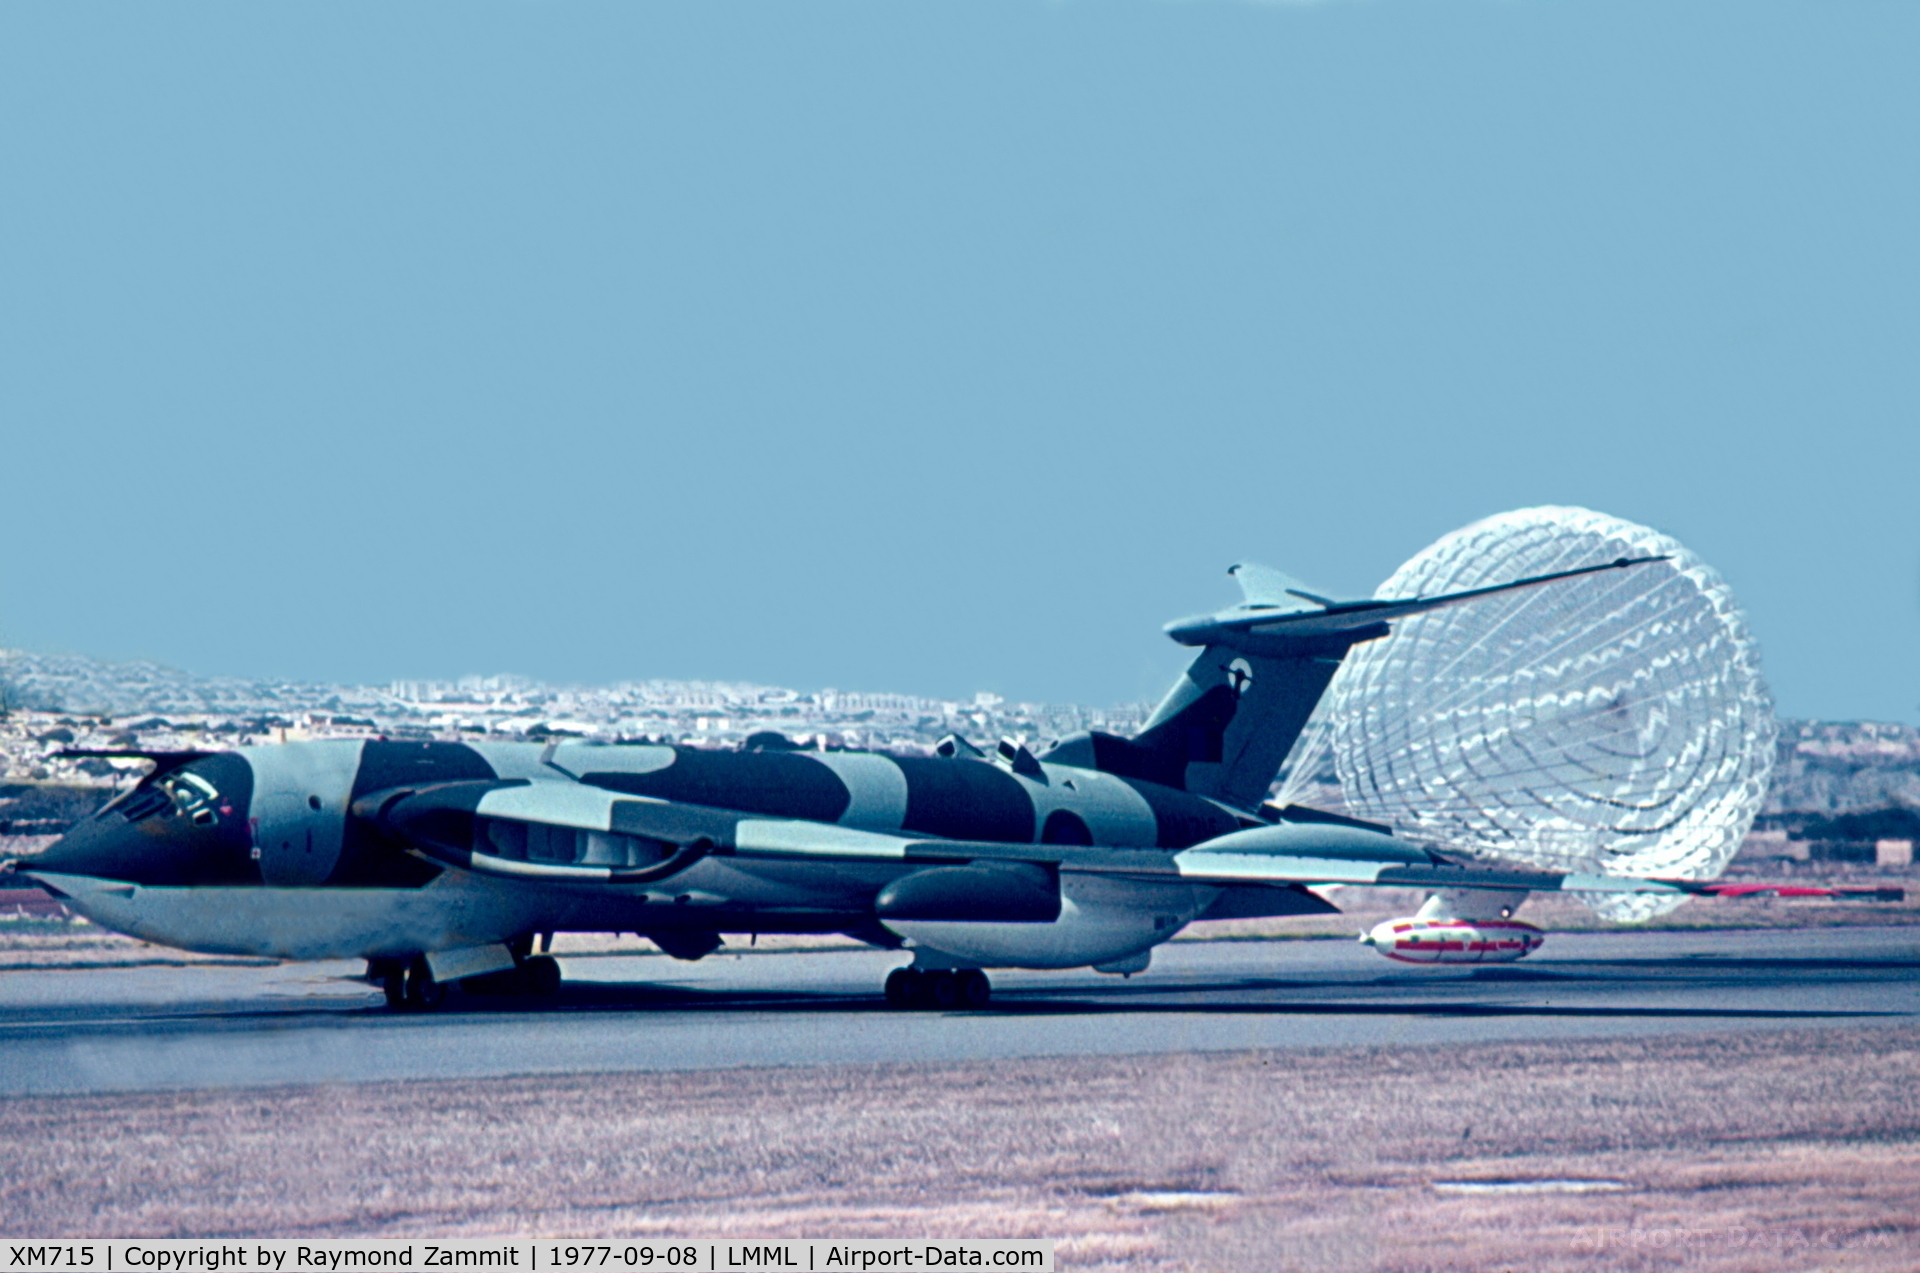 XM715, 1963 Handley Page Victor K.2 C/N HP80/83, HP Victor XM715 of N0 55Sqdn RAF after finishing from the air refueling sortie.